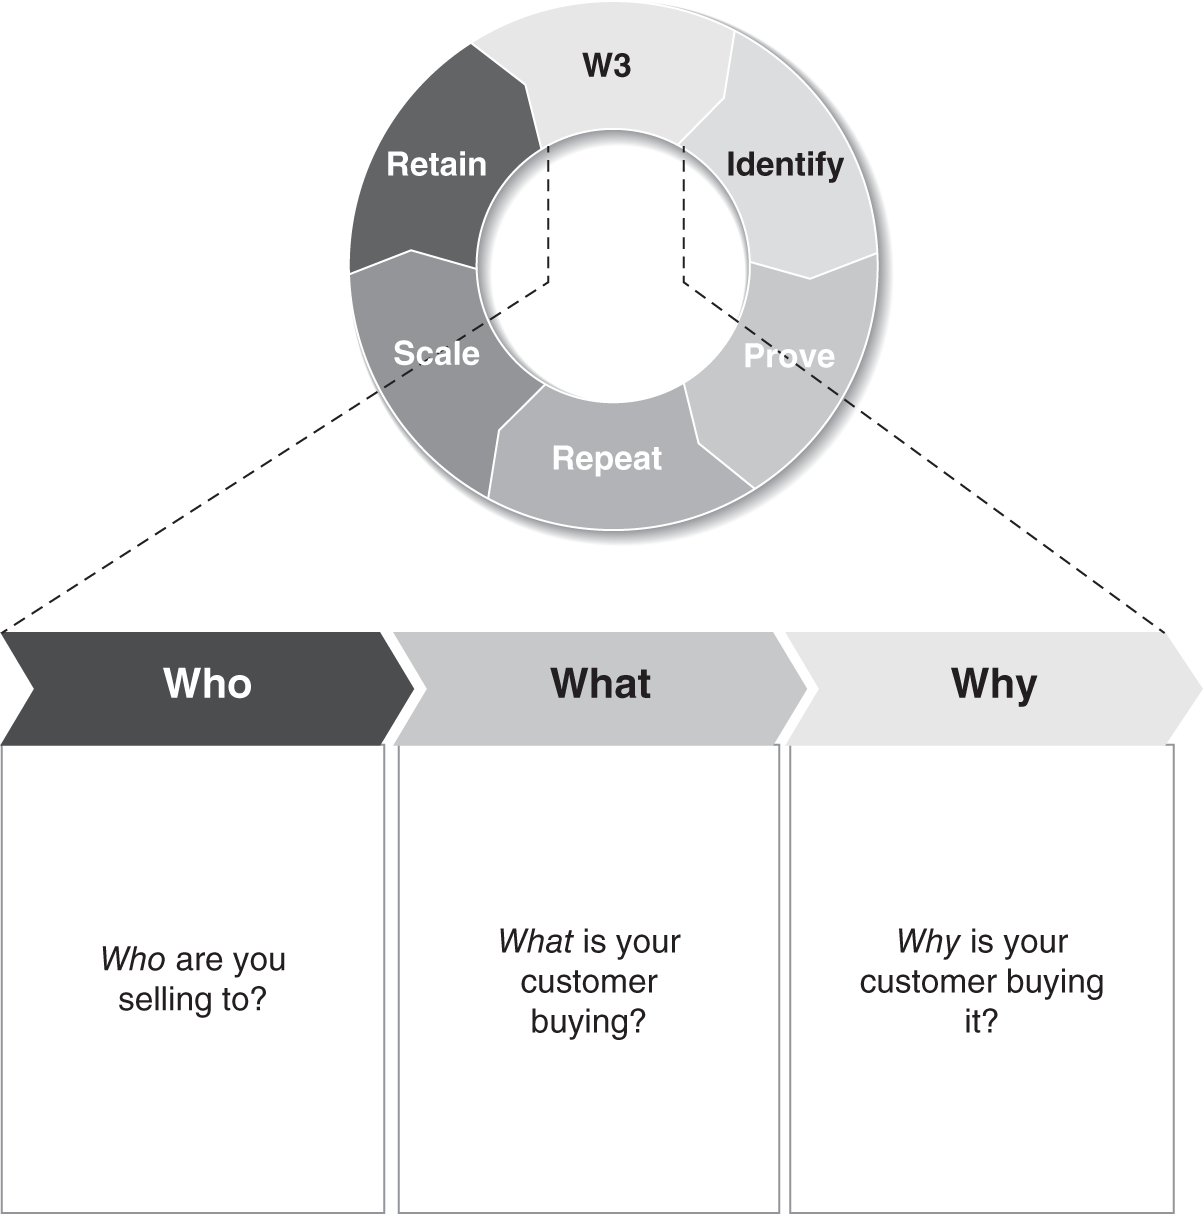 Illustration of the W3 Framework (Who, What, and Why) regarding selling a product to a customer.